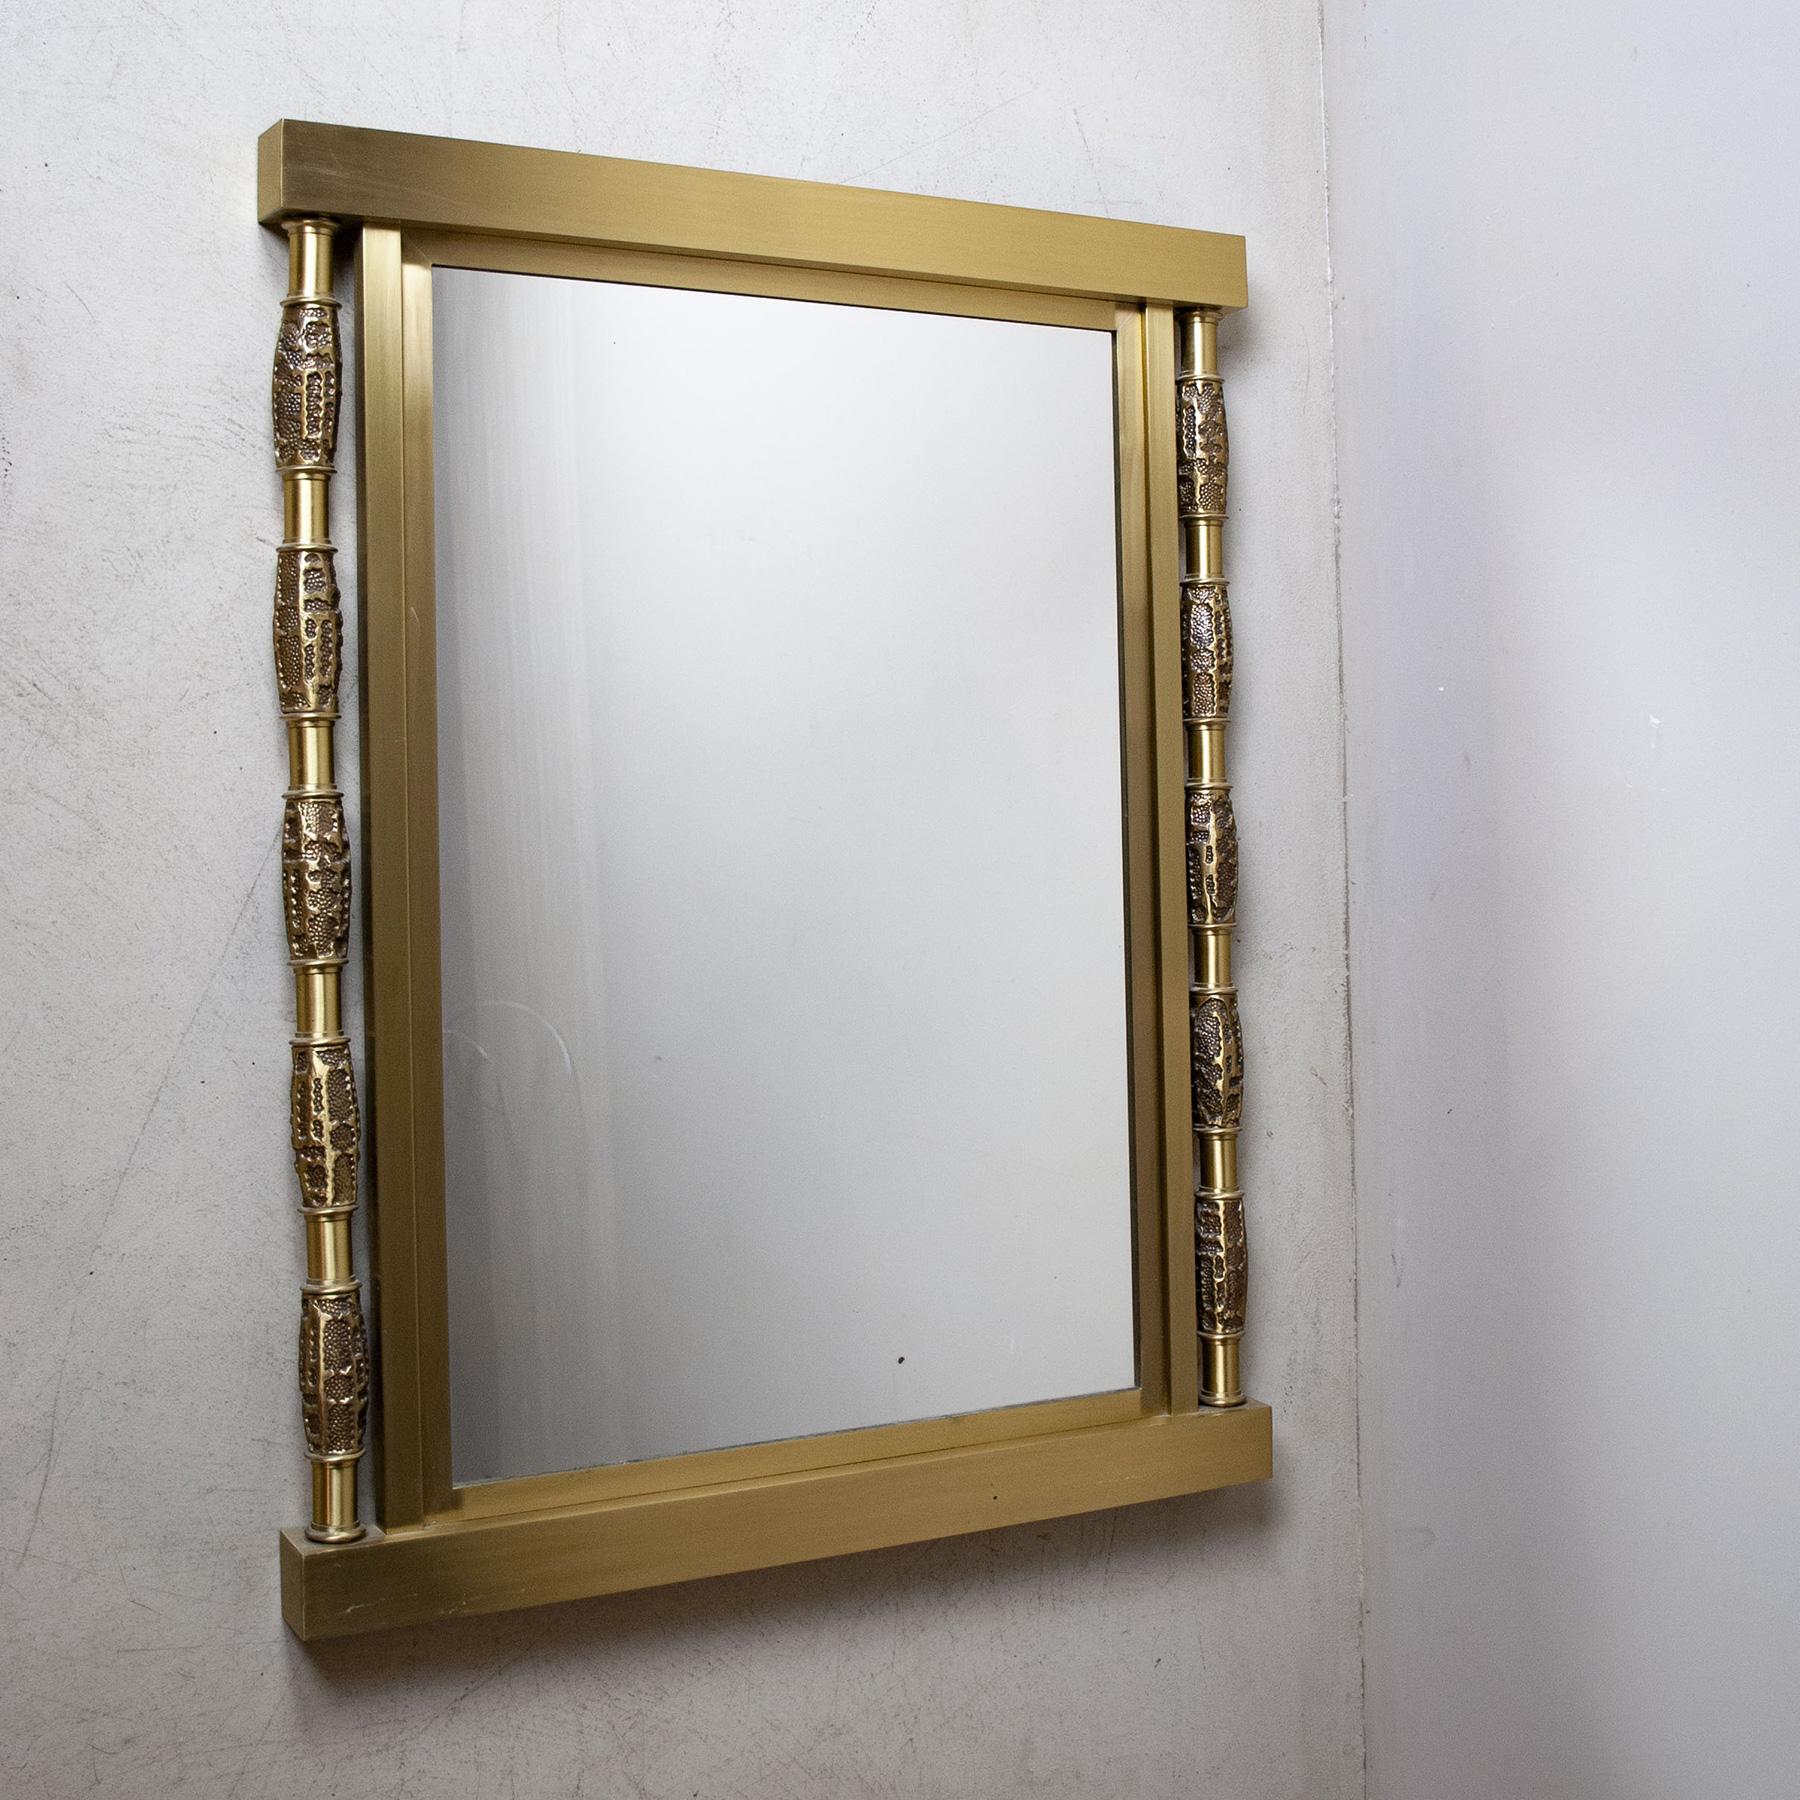 Die-cast brass mirror manufactured by Luciano Frigerio 1970s.

Luciano Frigerio was born in Desio in 1928. His father Giovanni started, from 1889, a high artisan cabinet-making workshop. Luciano attended kindergarten at the Paola di Rosa College